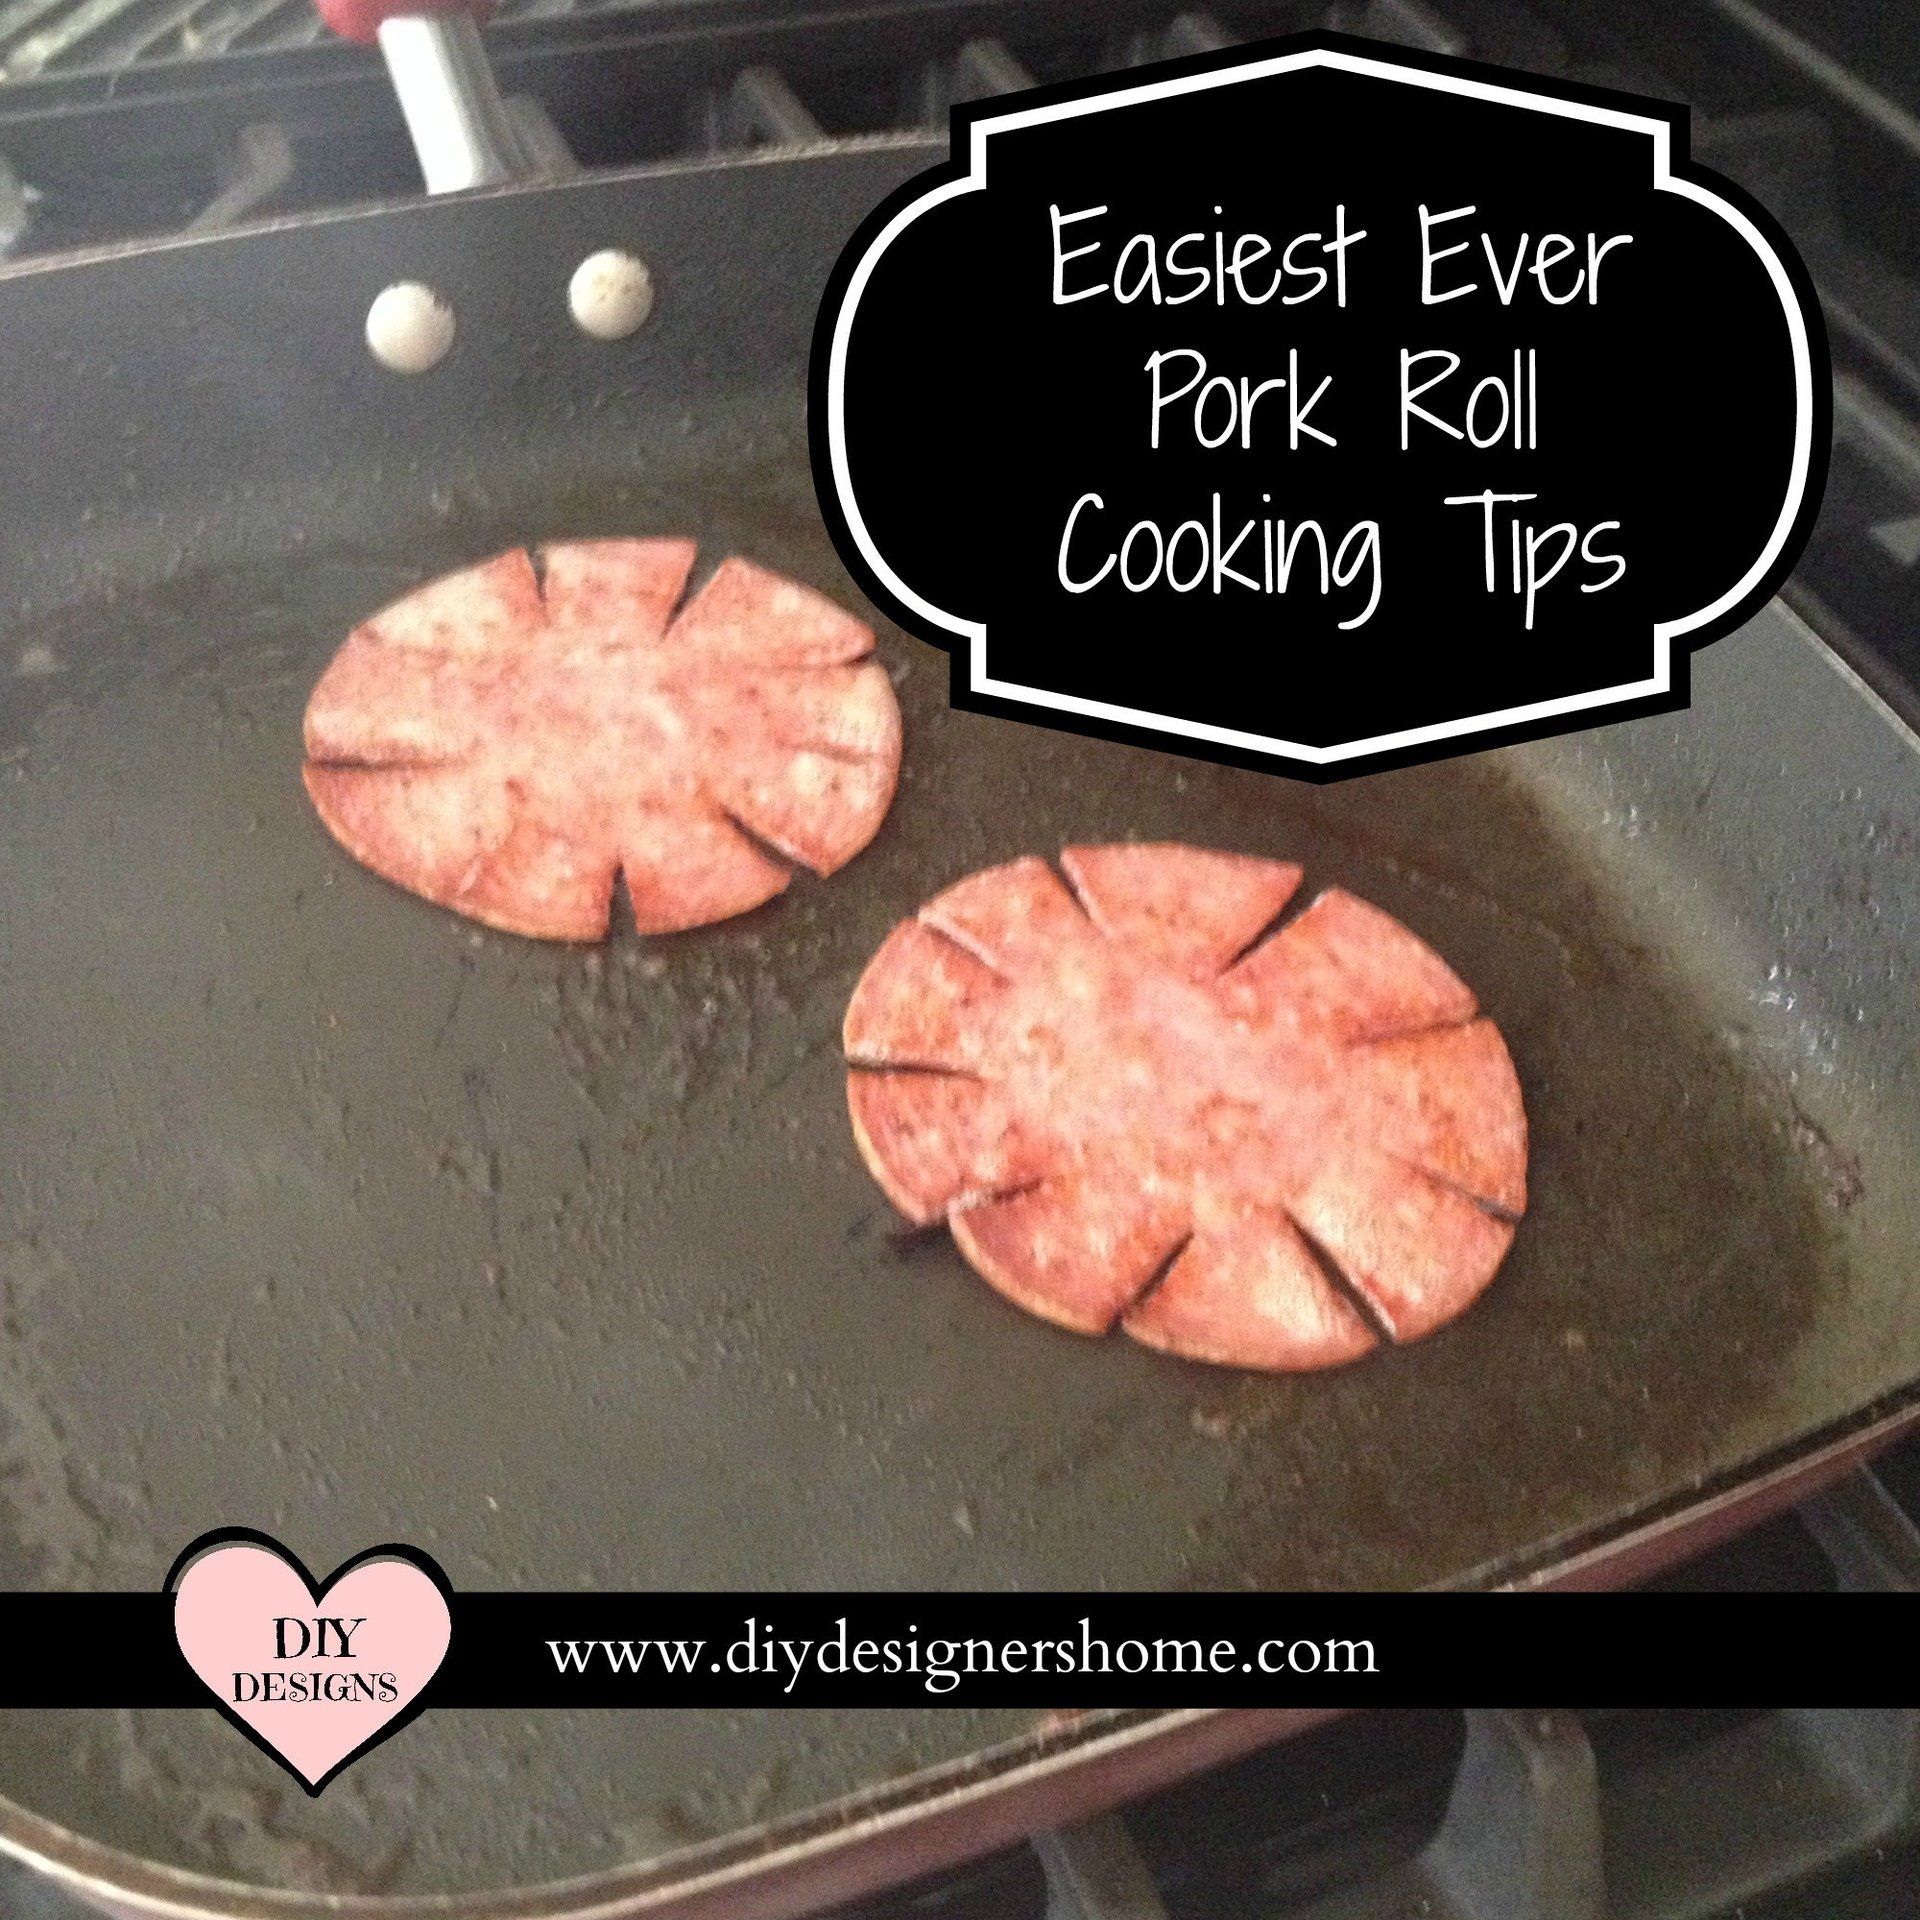 How To Cook Pork Roll NJ Style